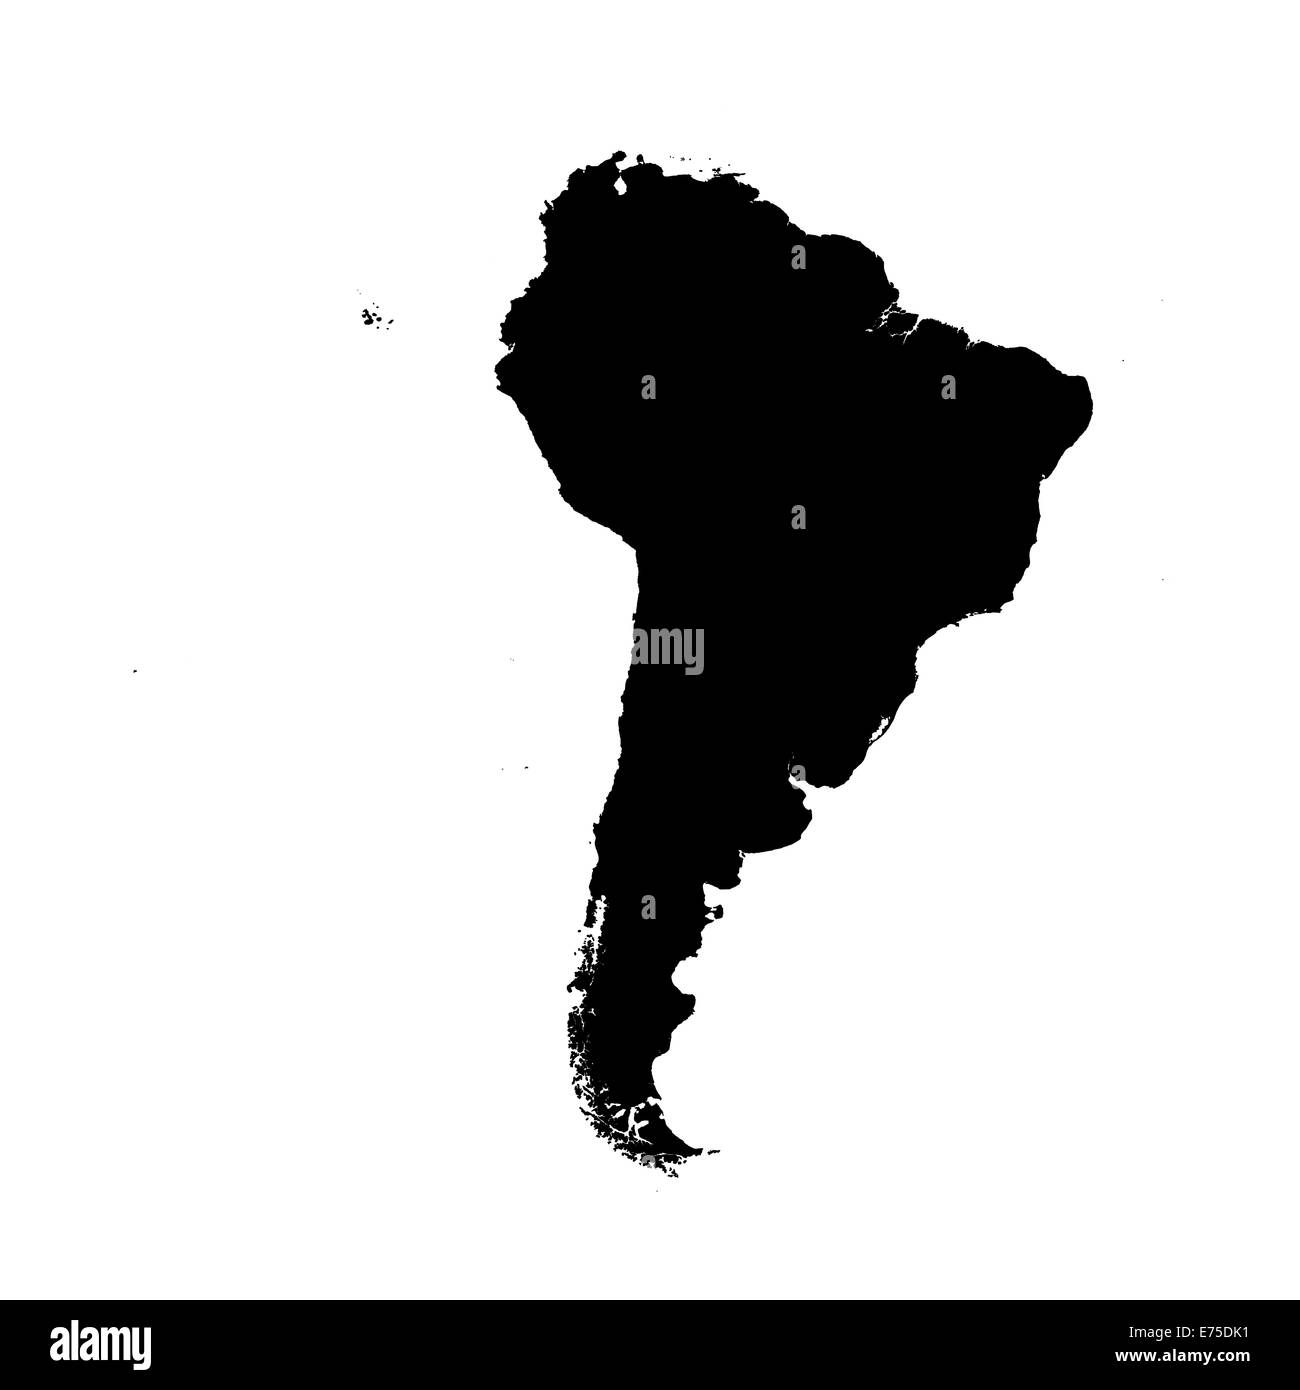 An Illustration on isolated background of the continent of South America Stock Photo